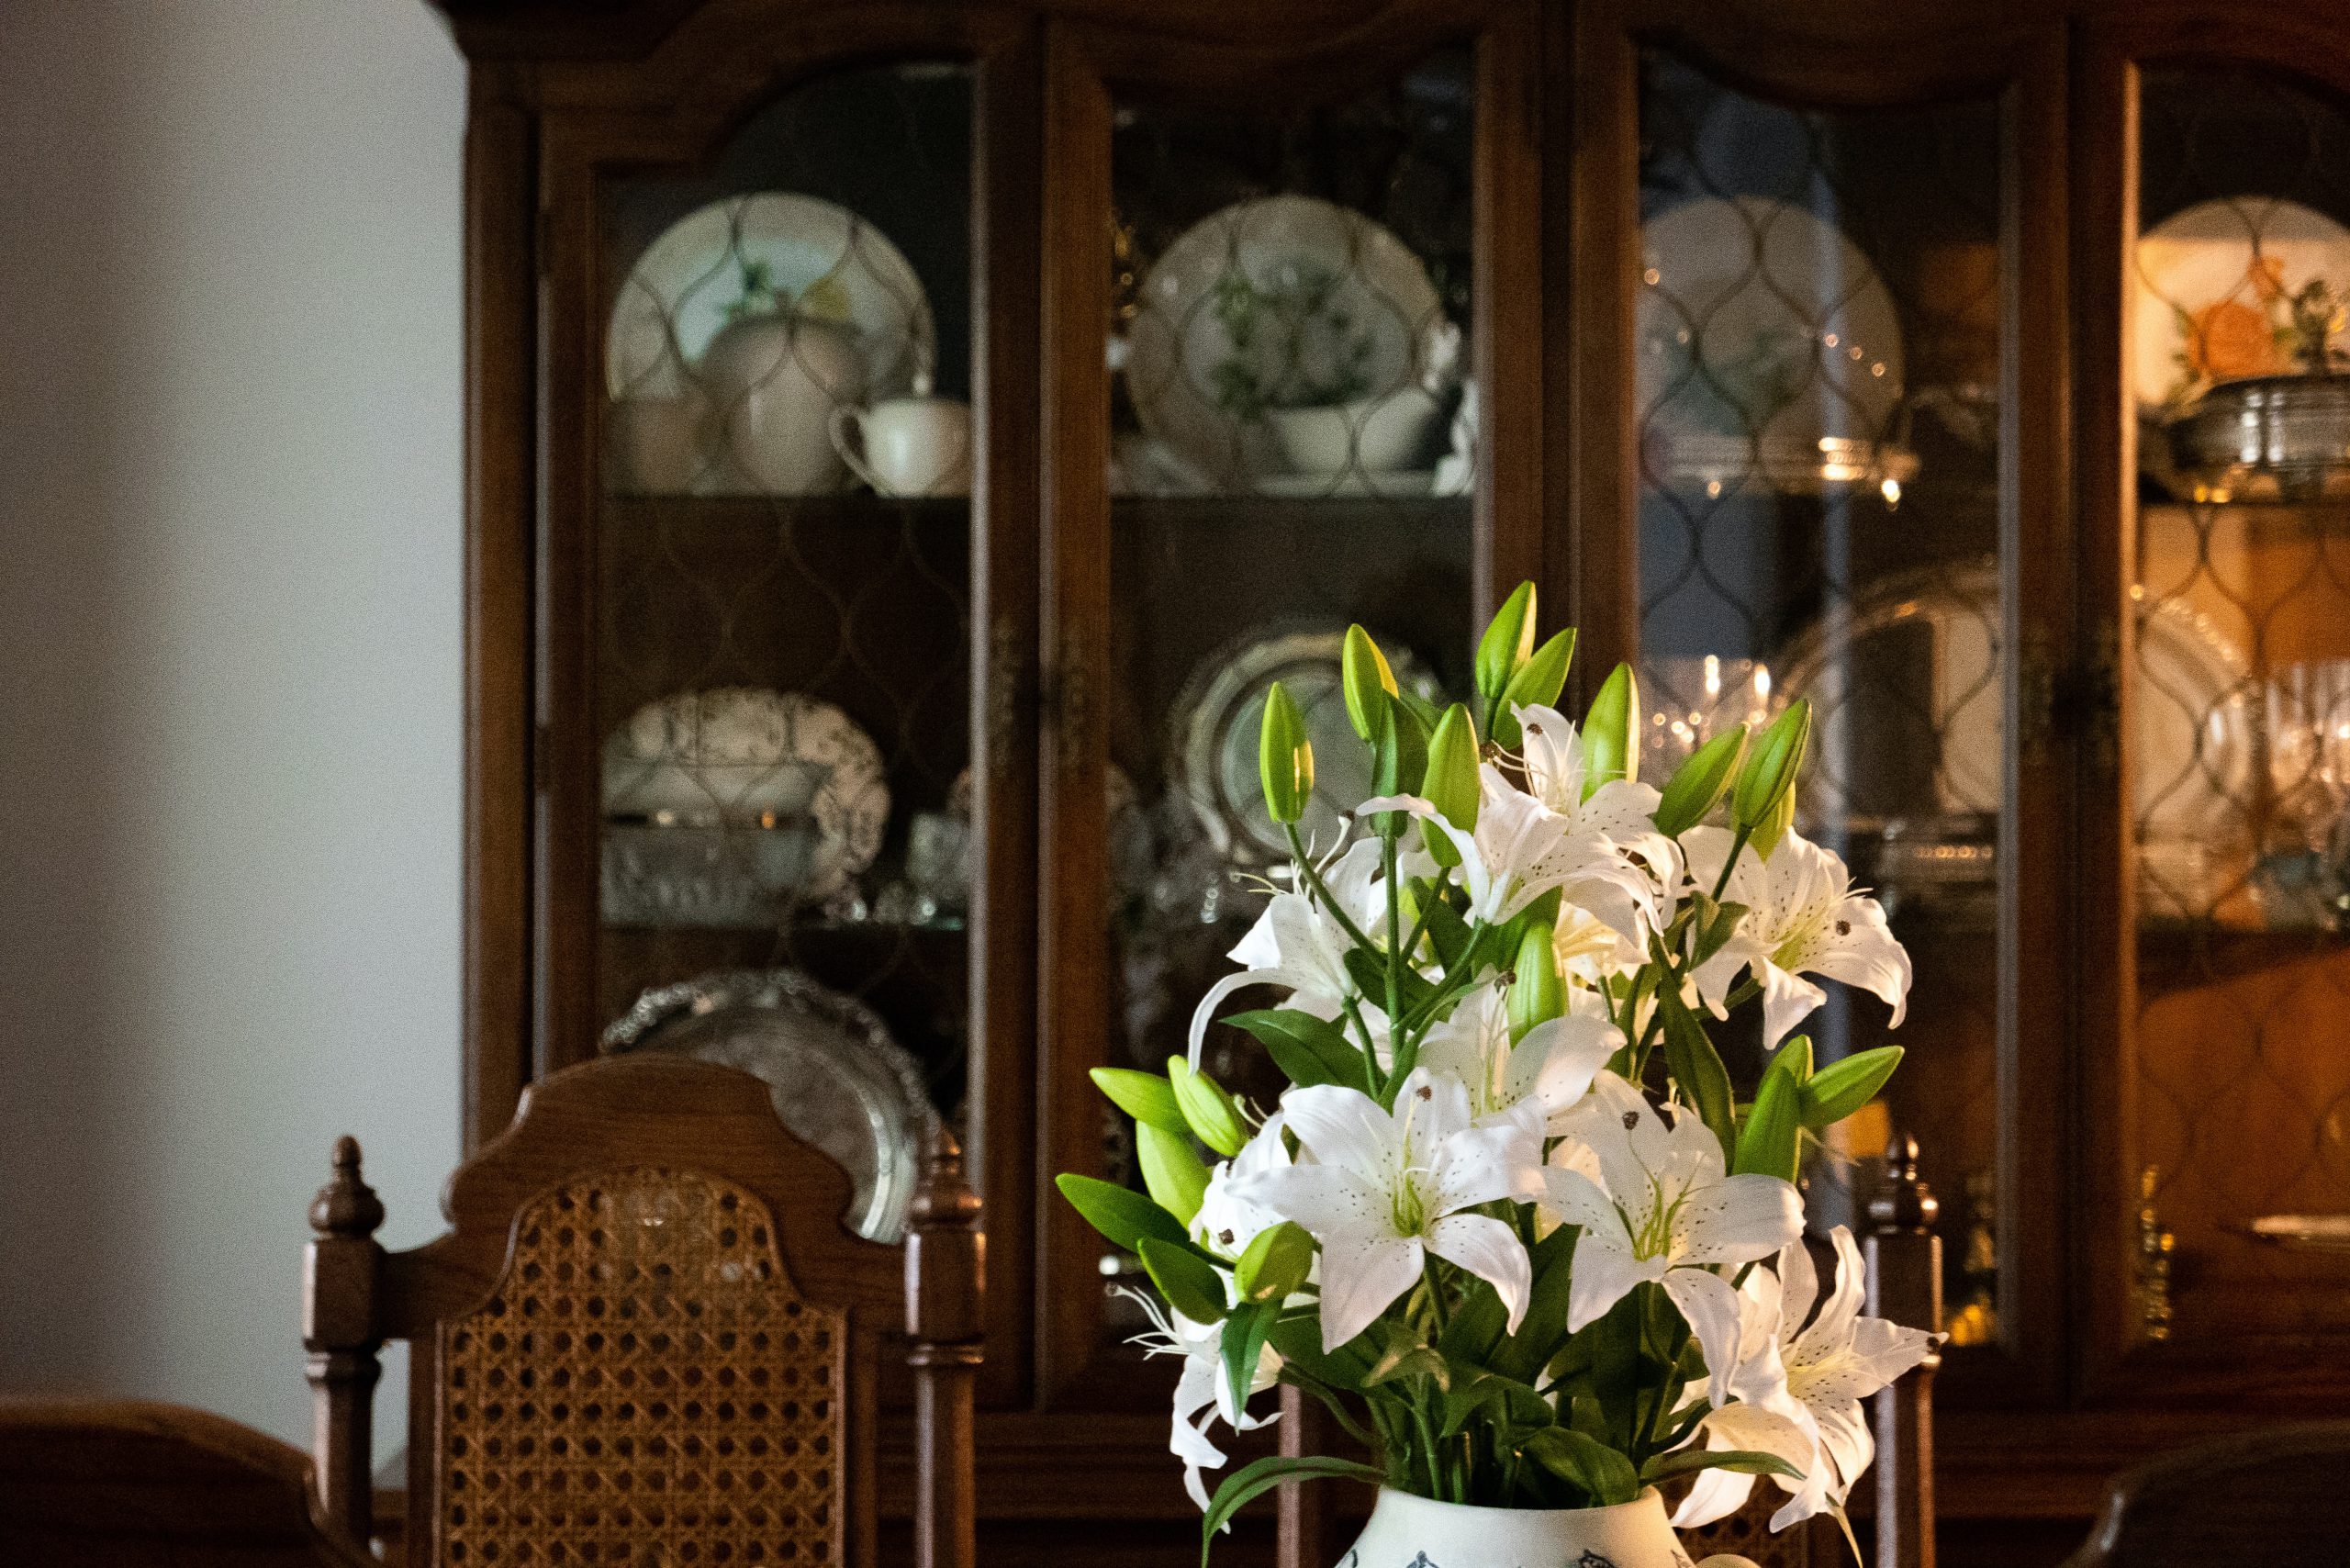 Dark wood china cabinet with a vase with white lilies in the foreground.